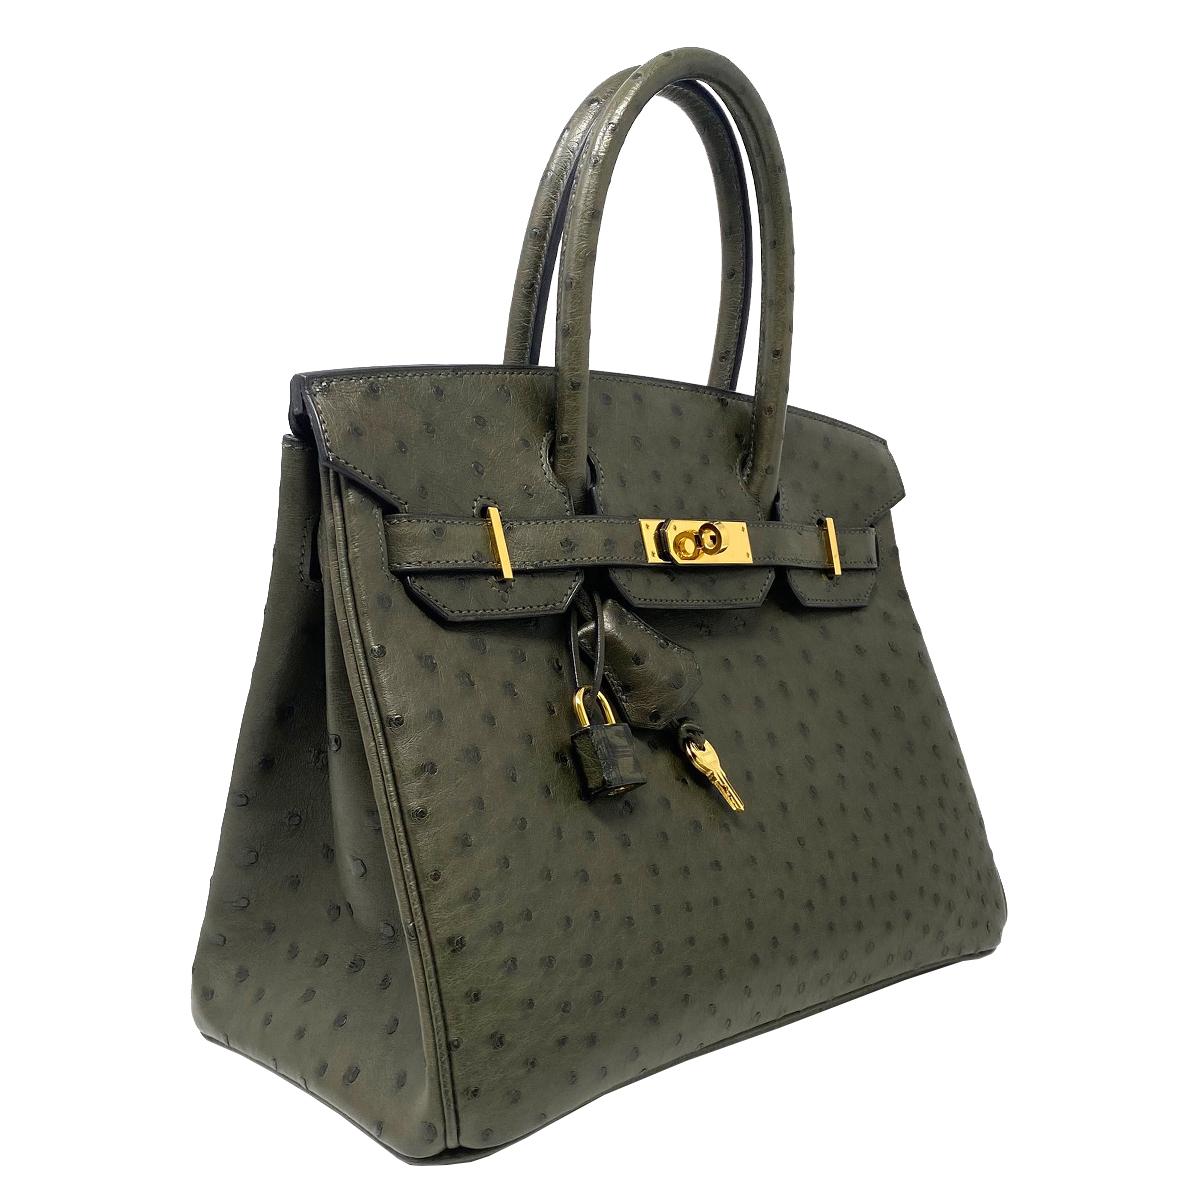 Company-Hermes
Model-Birkin 30cm                                           
Color-Exotic Vert Olive
Date Code-R Square 50 - 2014
Material-Ostrich Leather
Measurements-12